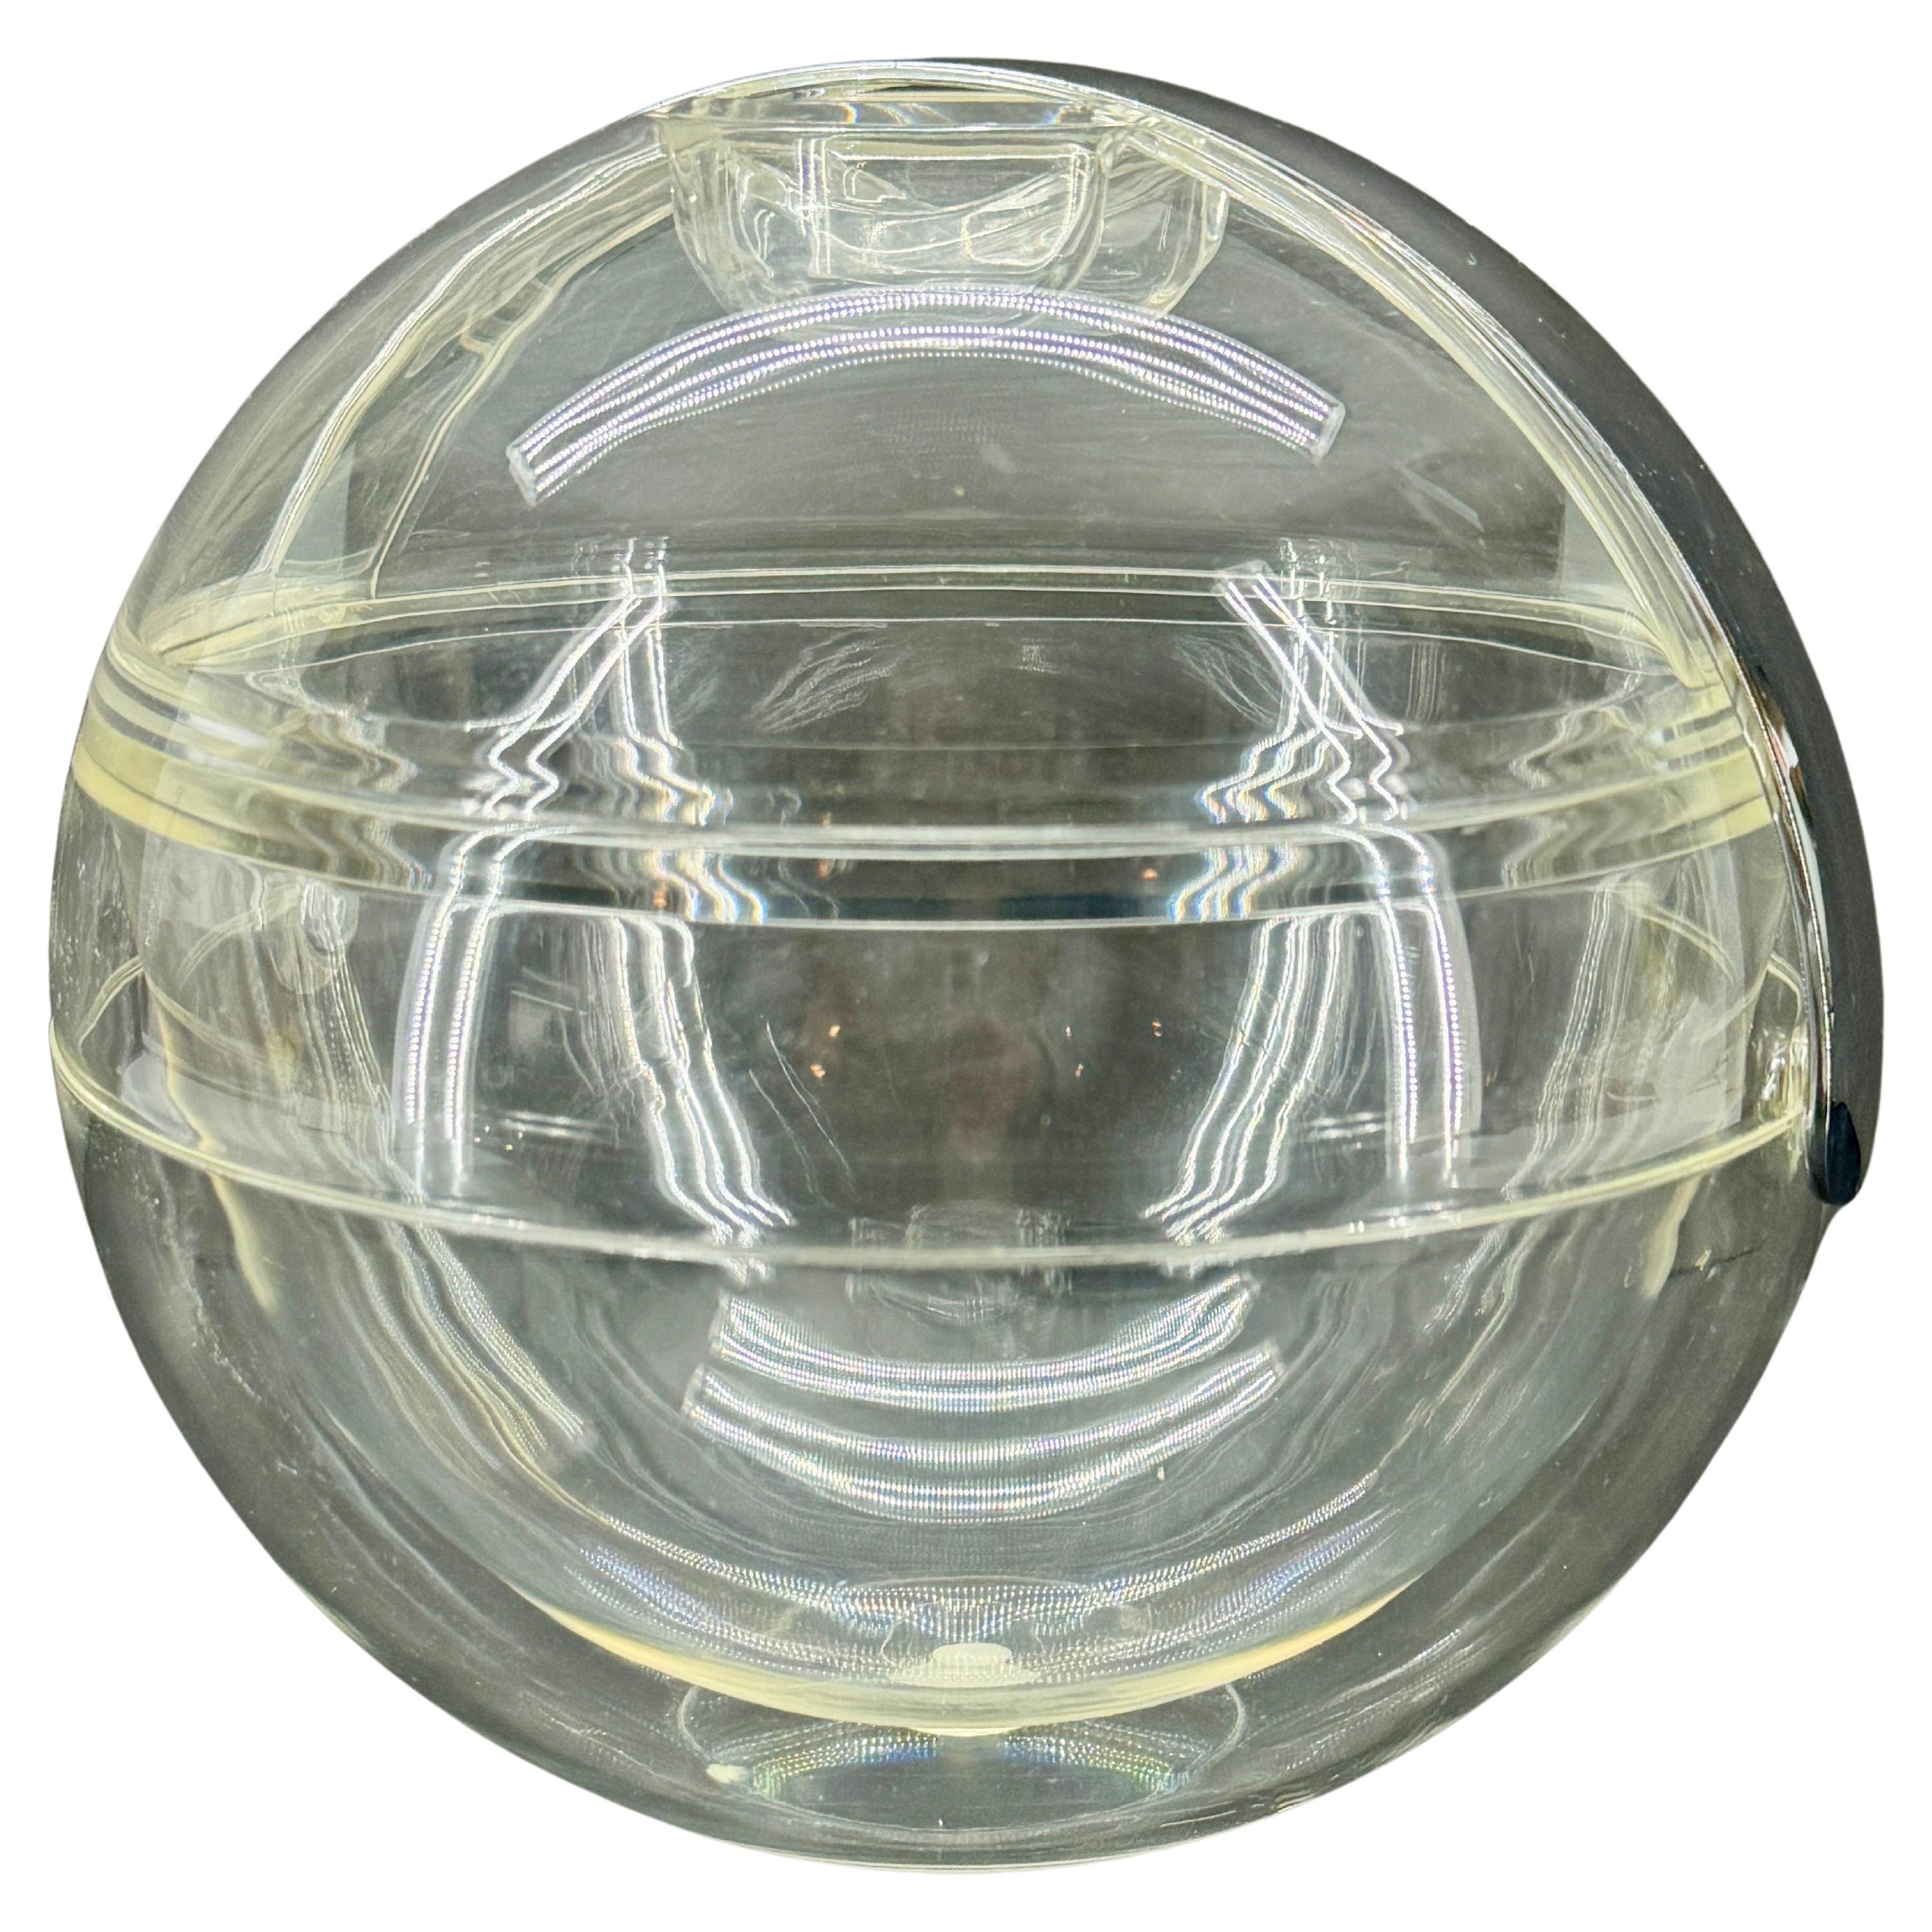 Clear acrylic glass ice bucket by Pablo Tilche for Guzzini Italy circa 1970s. This piece certainly makes a wonderful statement on a bar or bar cart. This piece has an attribution mark, Made in Italy.
